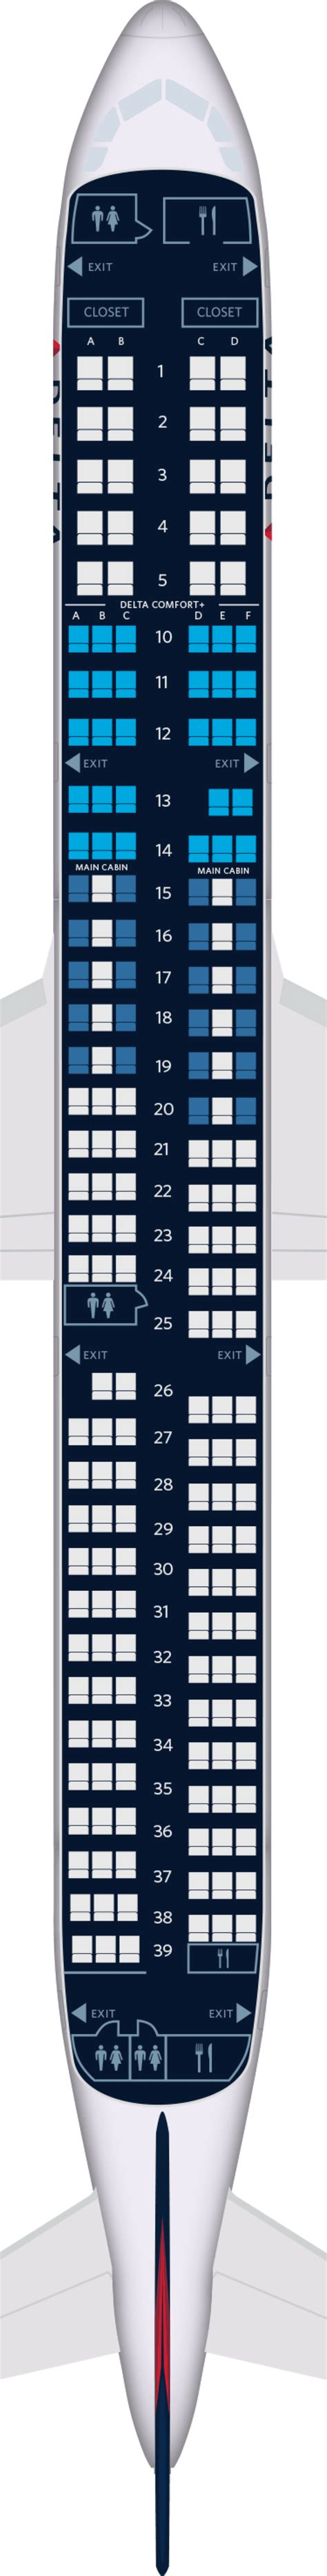 Airbus A321 Aircraft Seat Maps Specs And Amenities